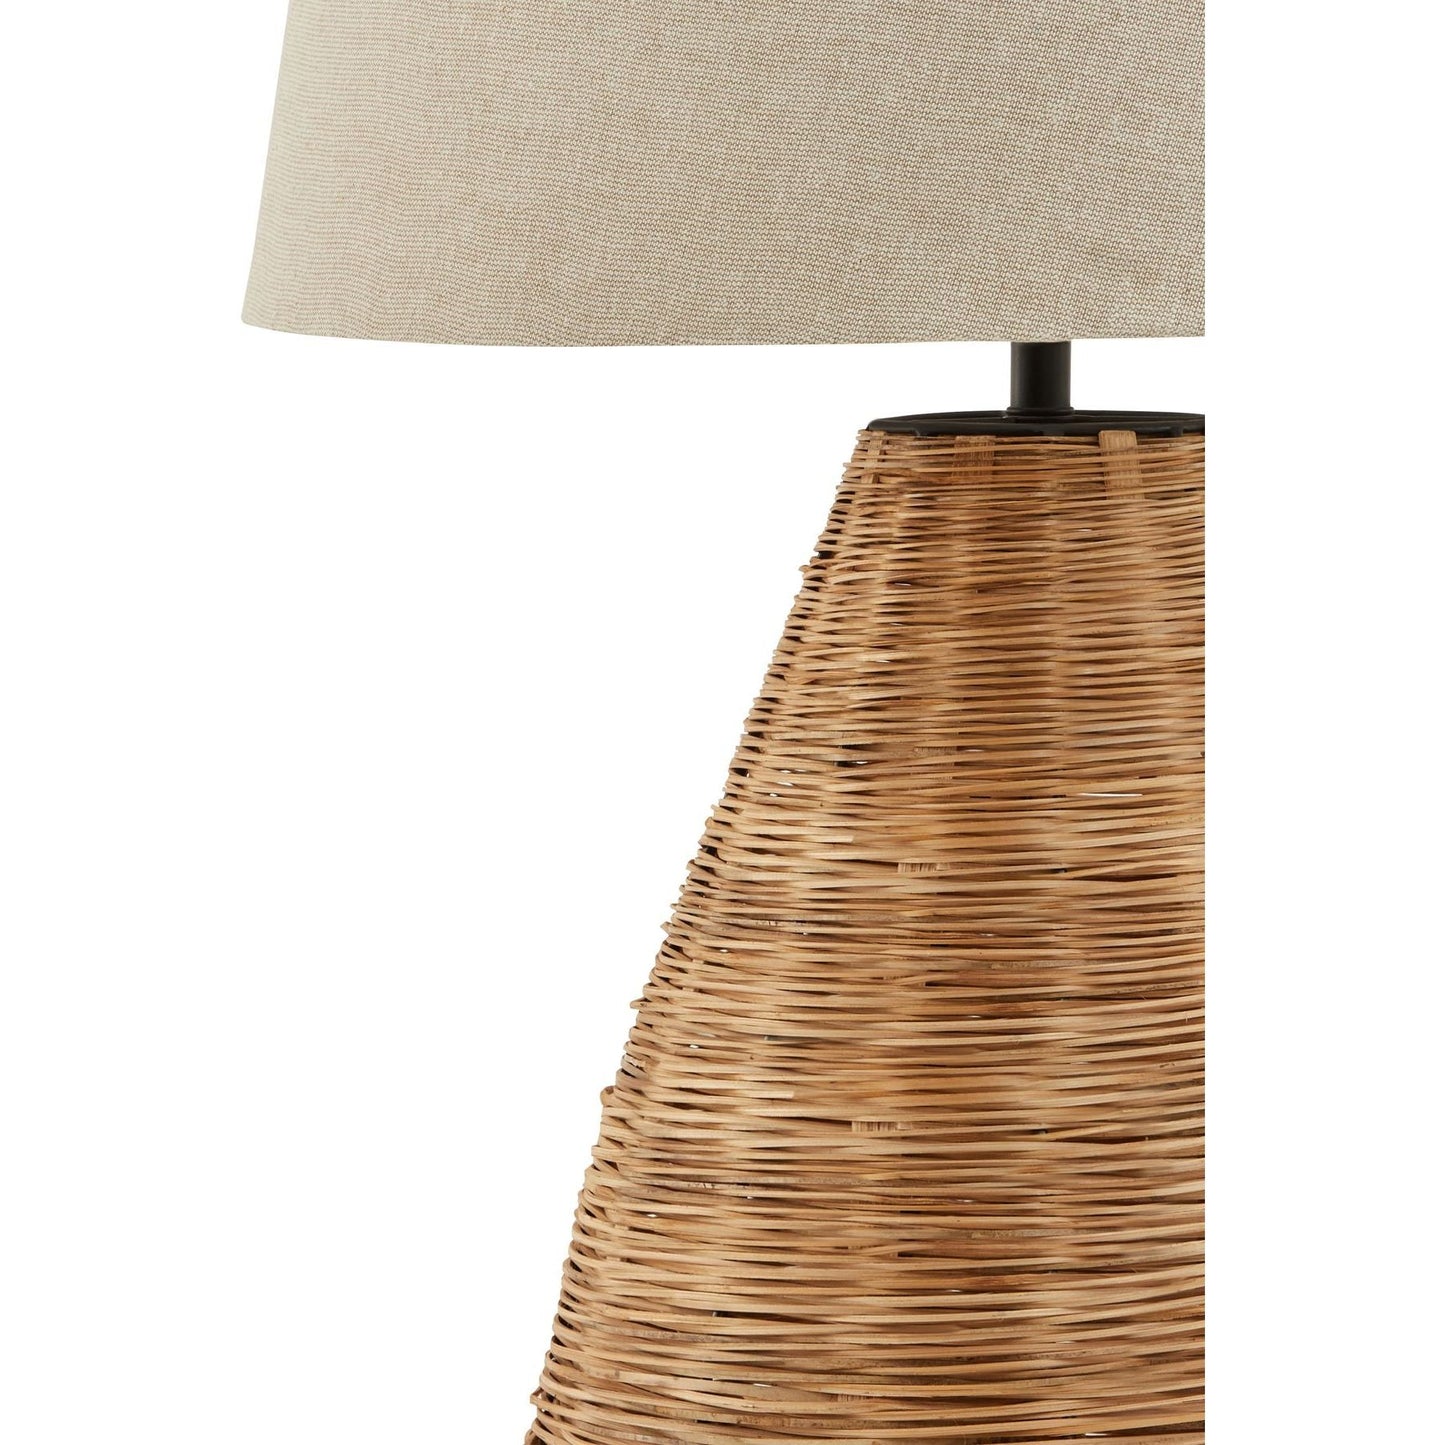 Conical Wicker Table Lamp With Linen Shade - Ashton and Finch